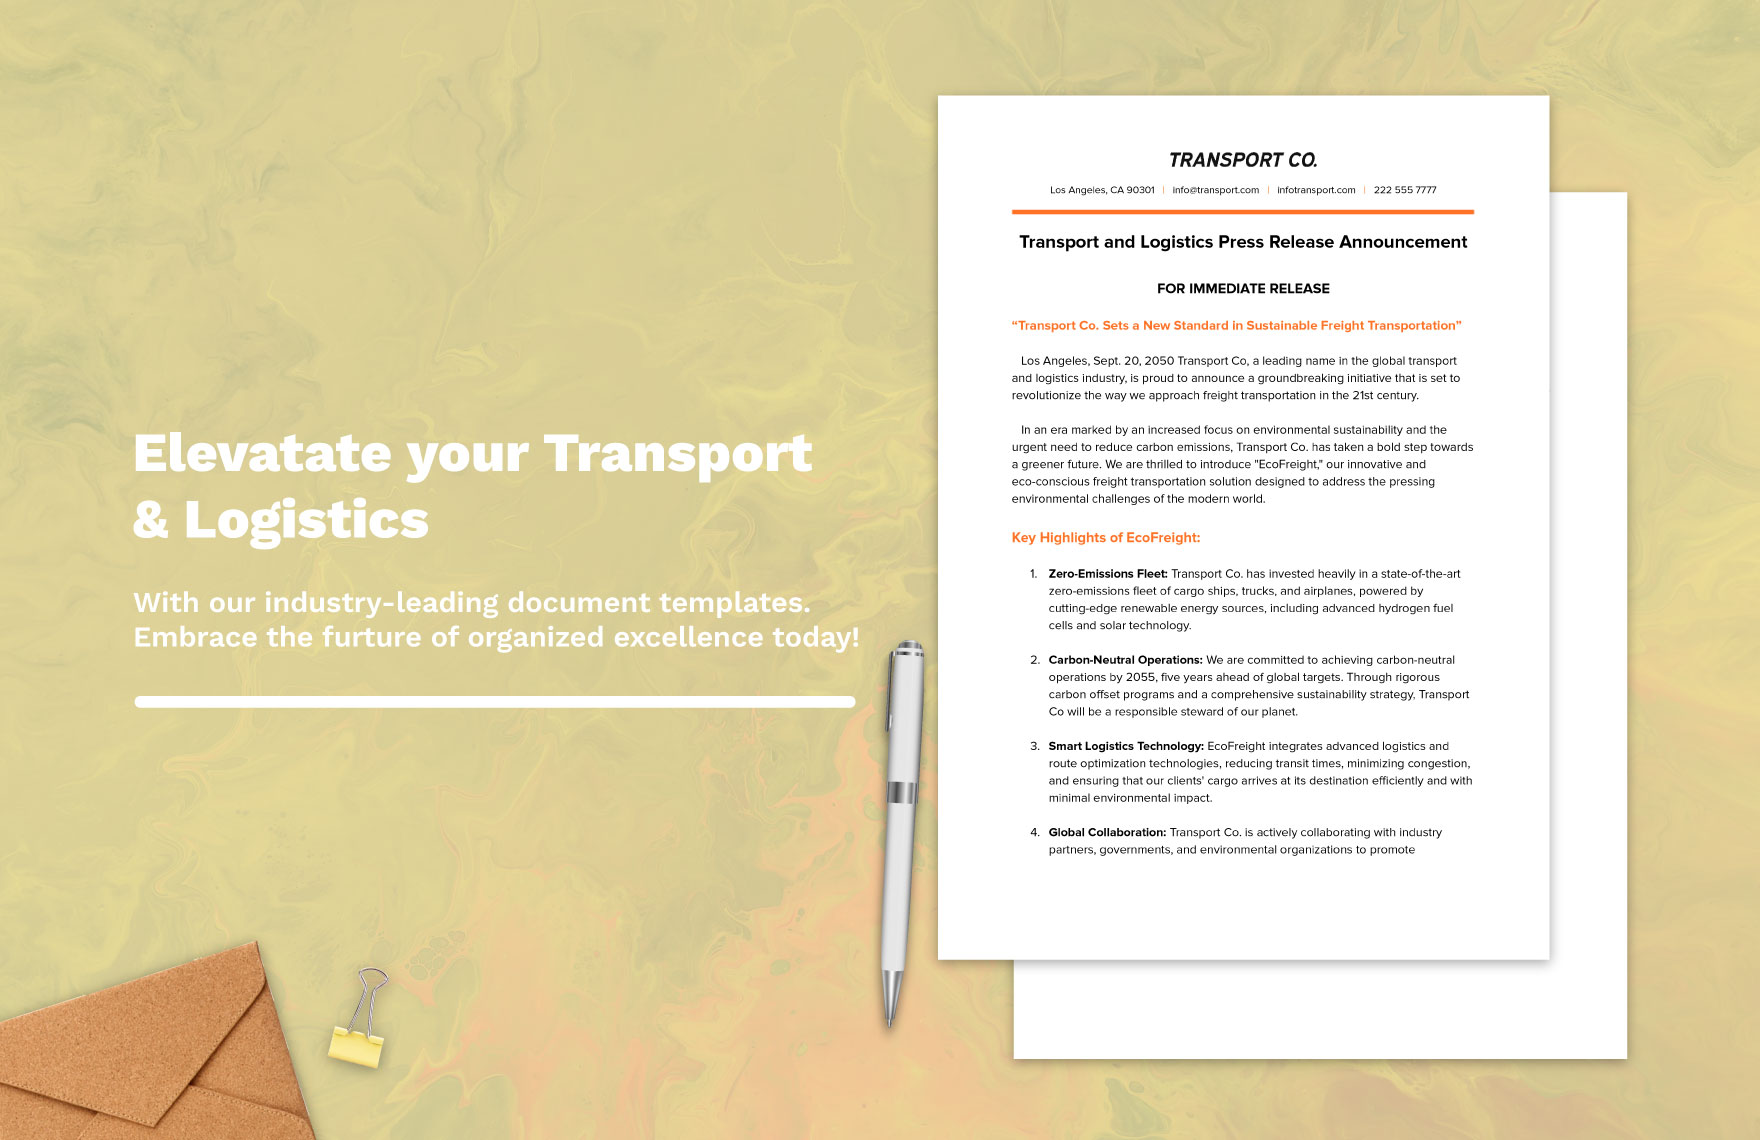 Transport and Logistics Press Release Announcement Template